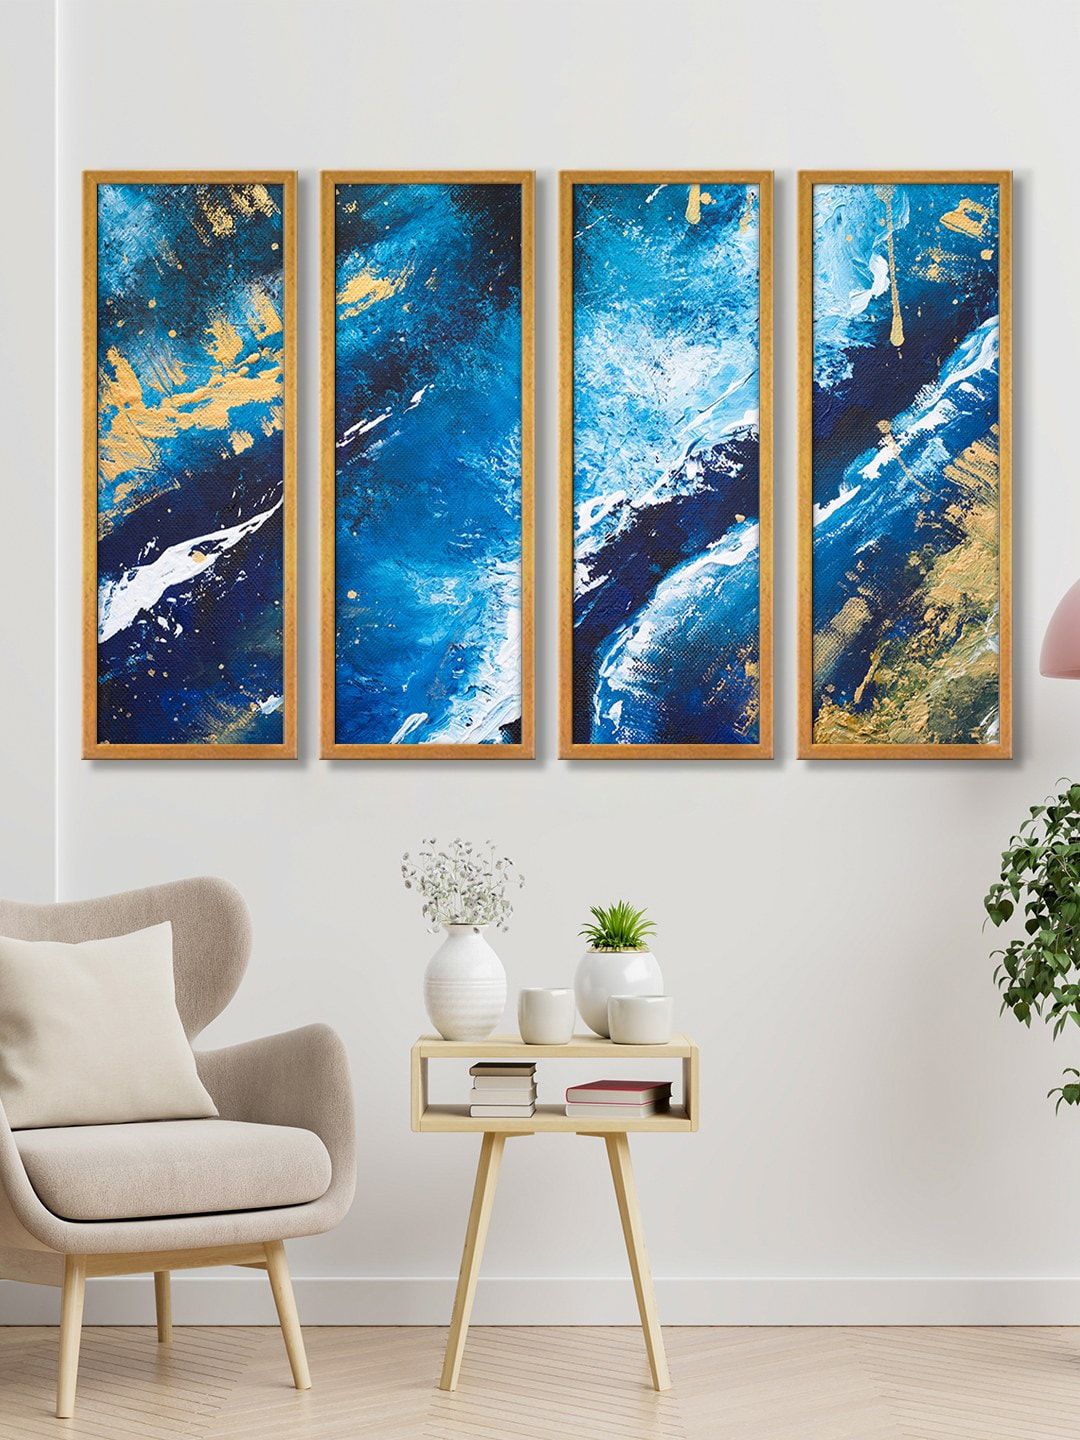 999Store Set of 3 Blue Abstract Canvas Wall Art Panels Price in India